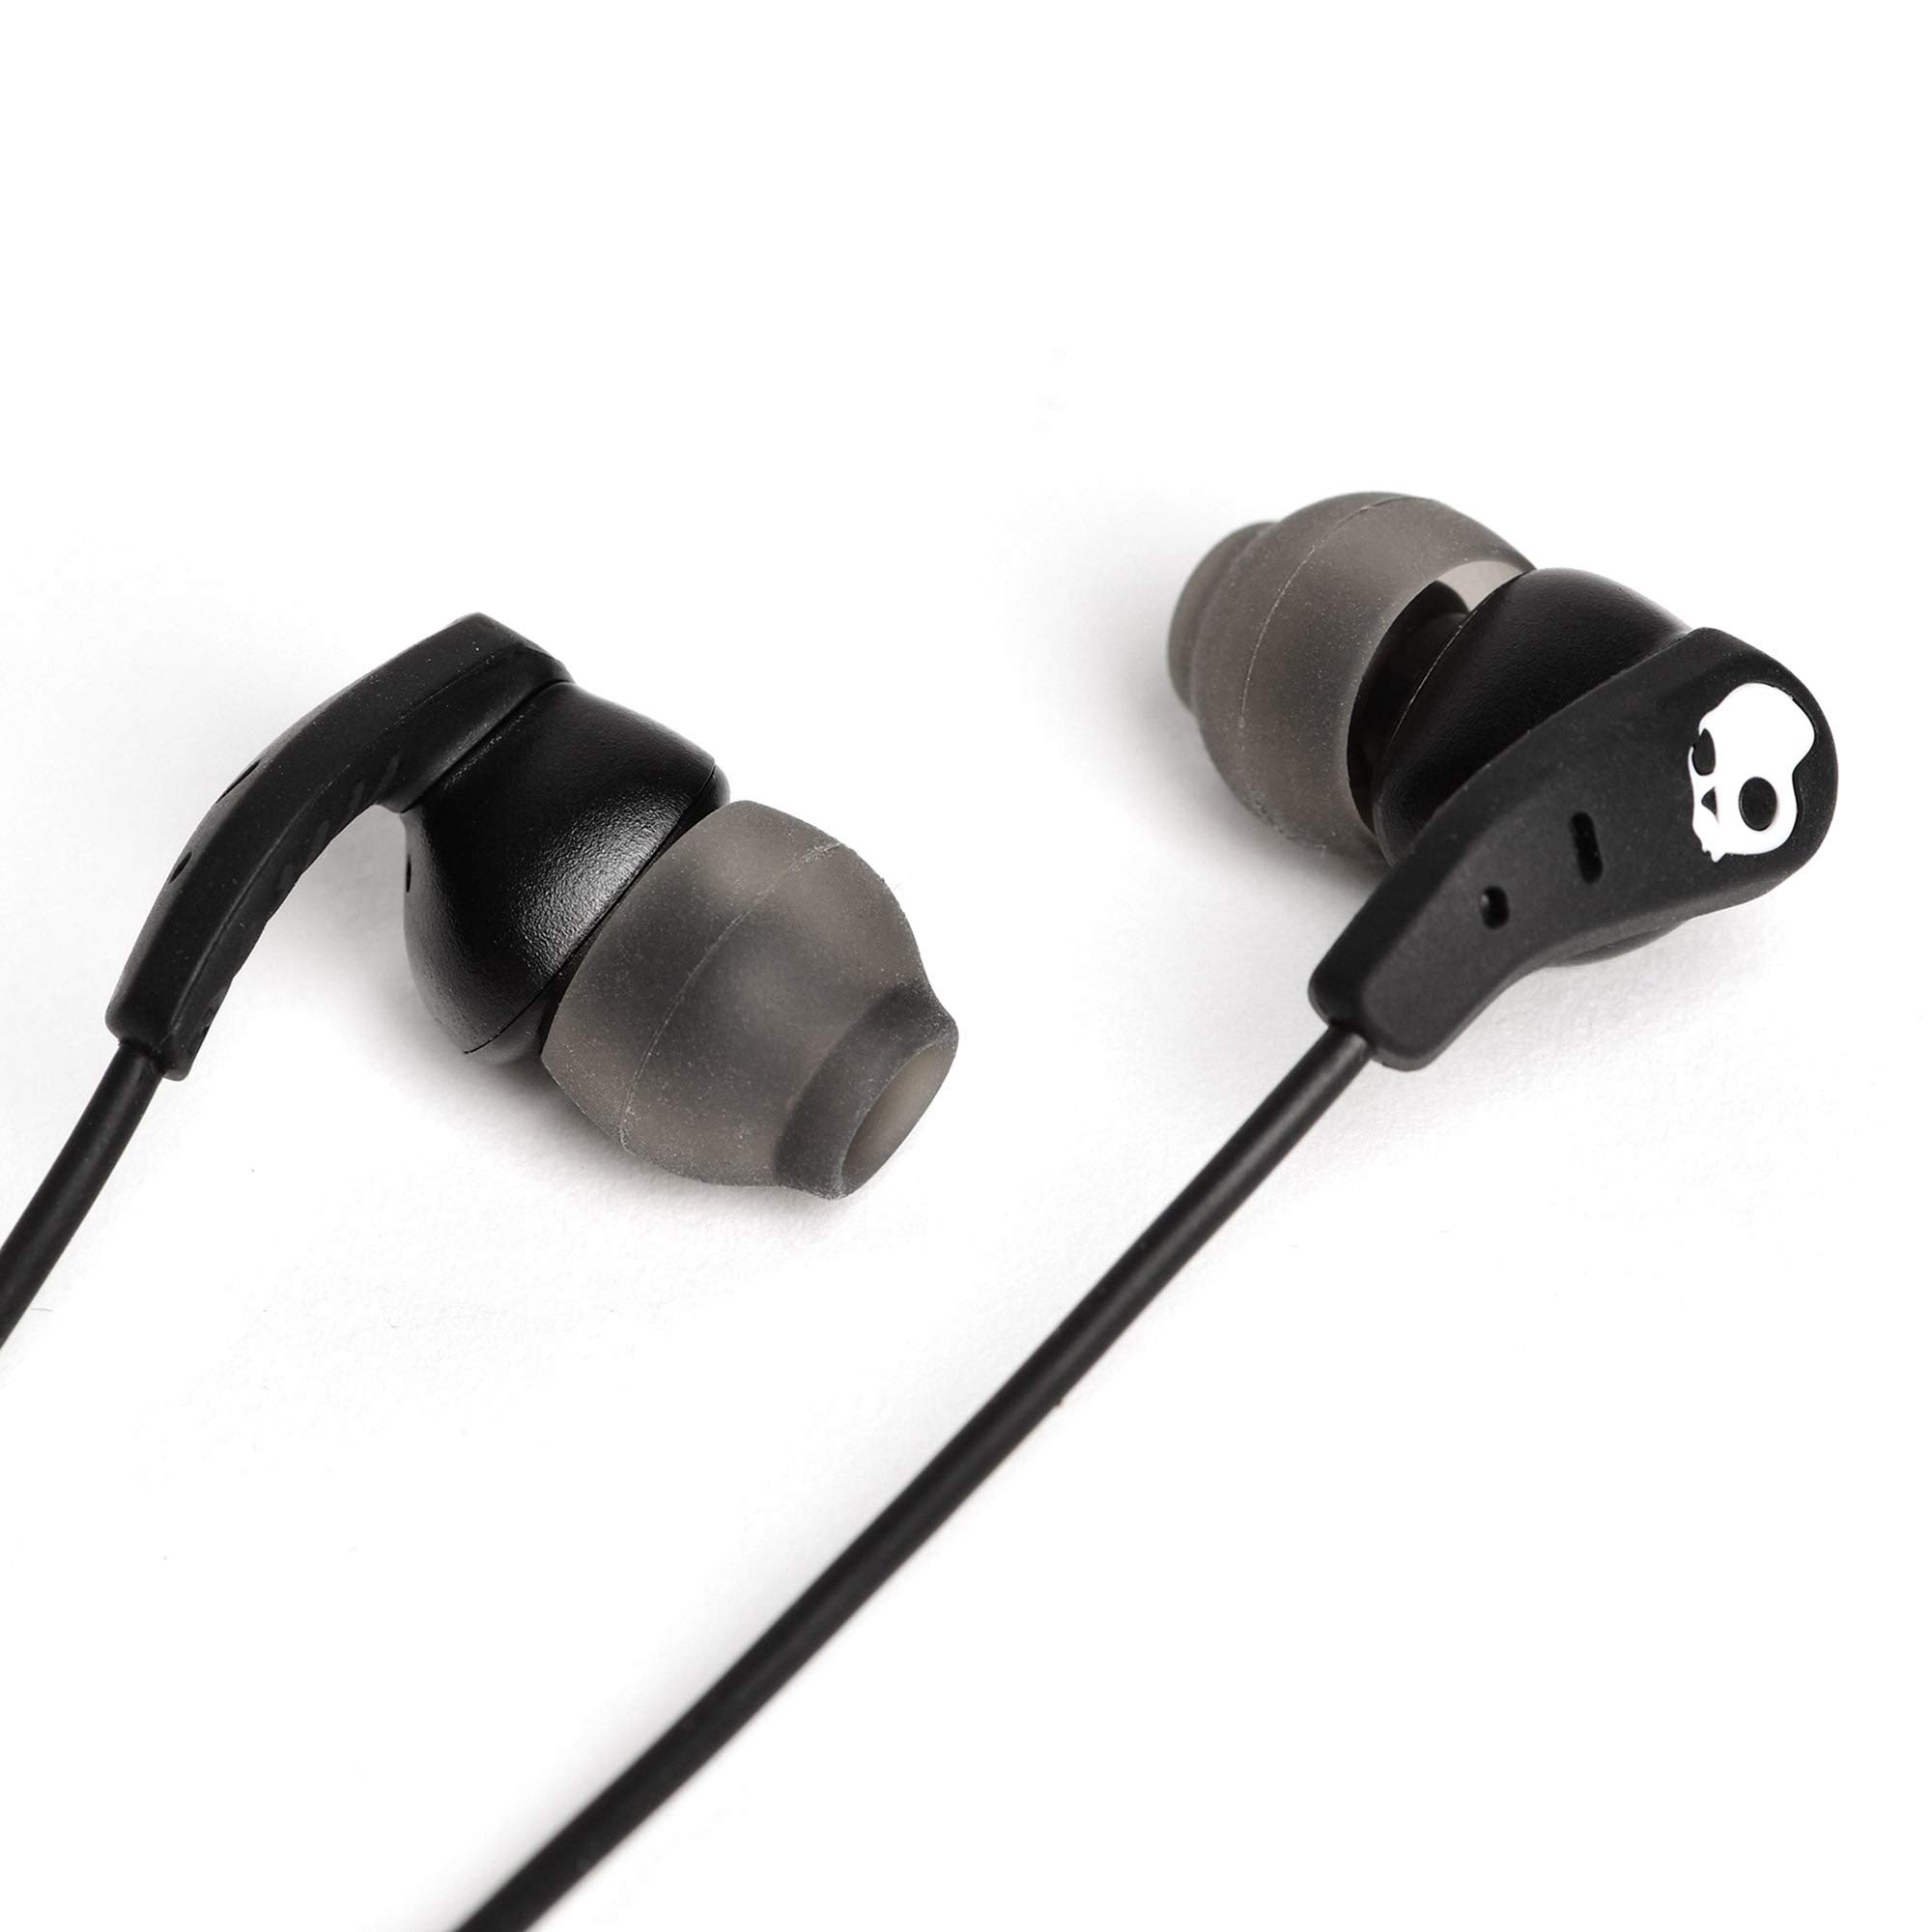 Skullcandy Set USB-C In-Ear Wired Earbuds, Microphone, Works with Android Laptop - Black